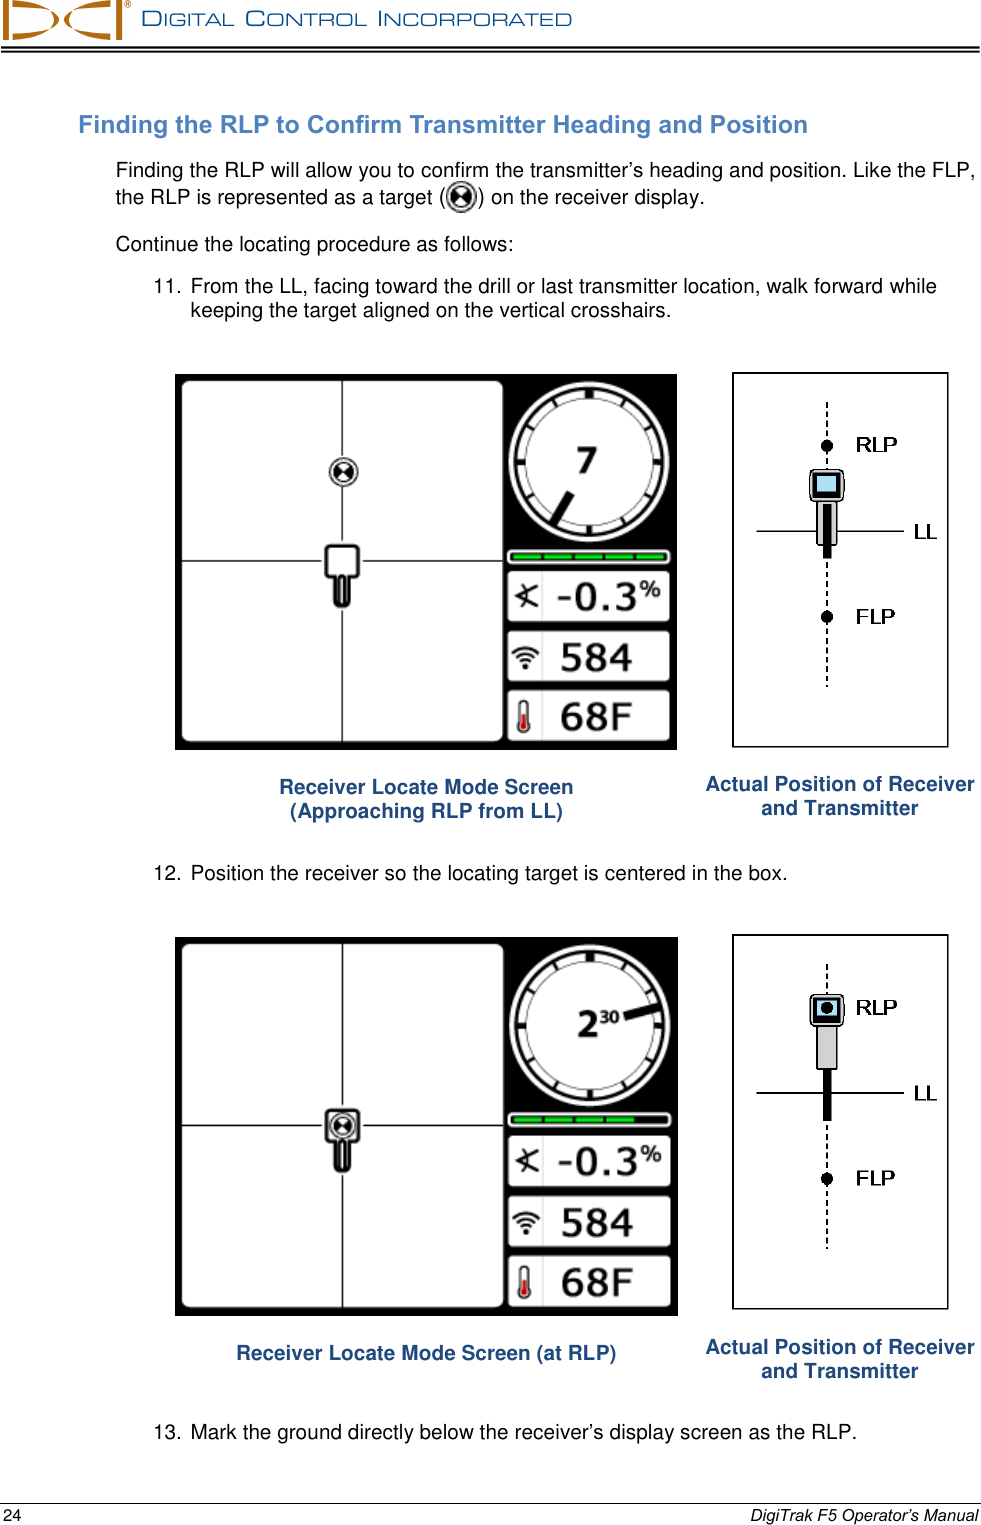   DIGITAL  CONTROL  INCORPORATED  24 DigiTrak F5 Operator’s Manual Finding the RLP to Confirm Transmitter Heading and Position Finding the RLP will allow you to confirm the transmitter’s heading and position. Like the FLP, the RLP is represented as a target ( ) on the receiver display.  Continue the locating procedure as follows: 11. From the LL, facing toward the drill or last transmitter location, walk forward while keeping the target aligned on the vertical crosshairs.  Receiver Locate Mode Screen  (Approaching RLP from LL)  Actual Position of Receiver and Transmitter 12. Position the receiver so the locating target is centered in the box.  Receiver Locate Mode Screen (at RLP)  Actual Position of Receiver and Transmitter 13. Mark the ground directly below the receiver’s display screen as the RLP. 